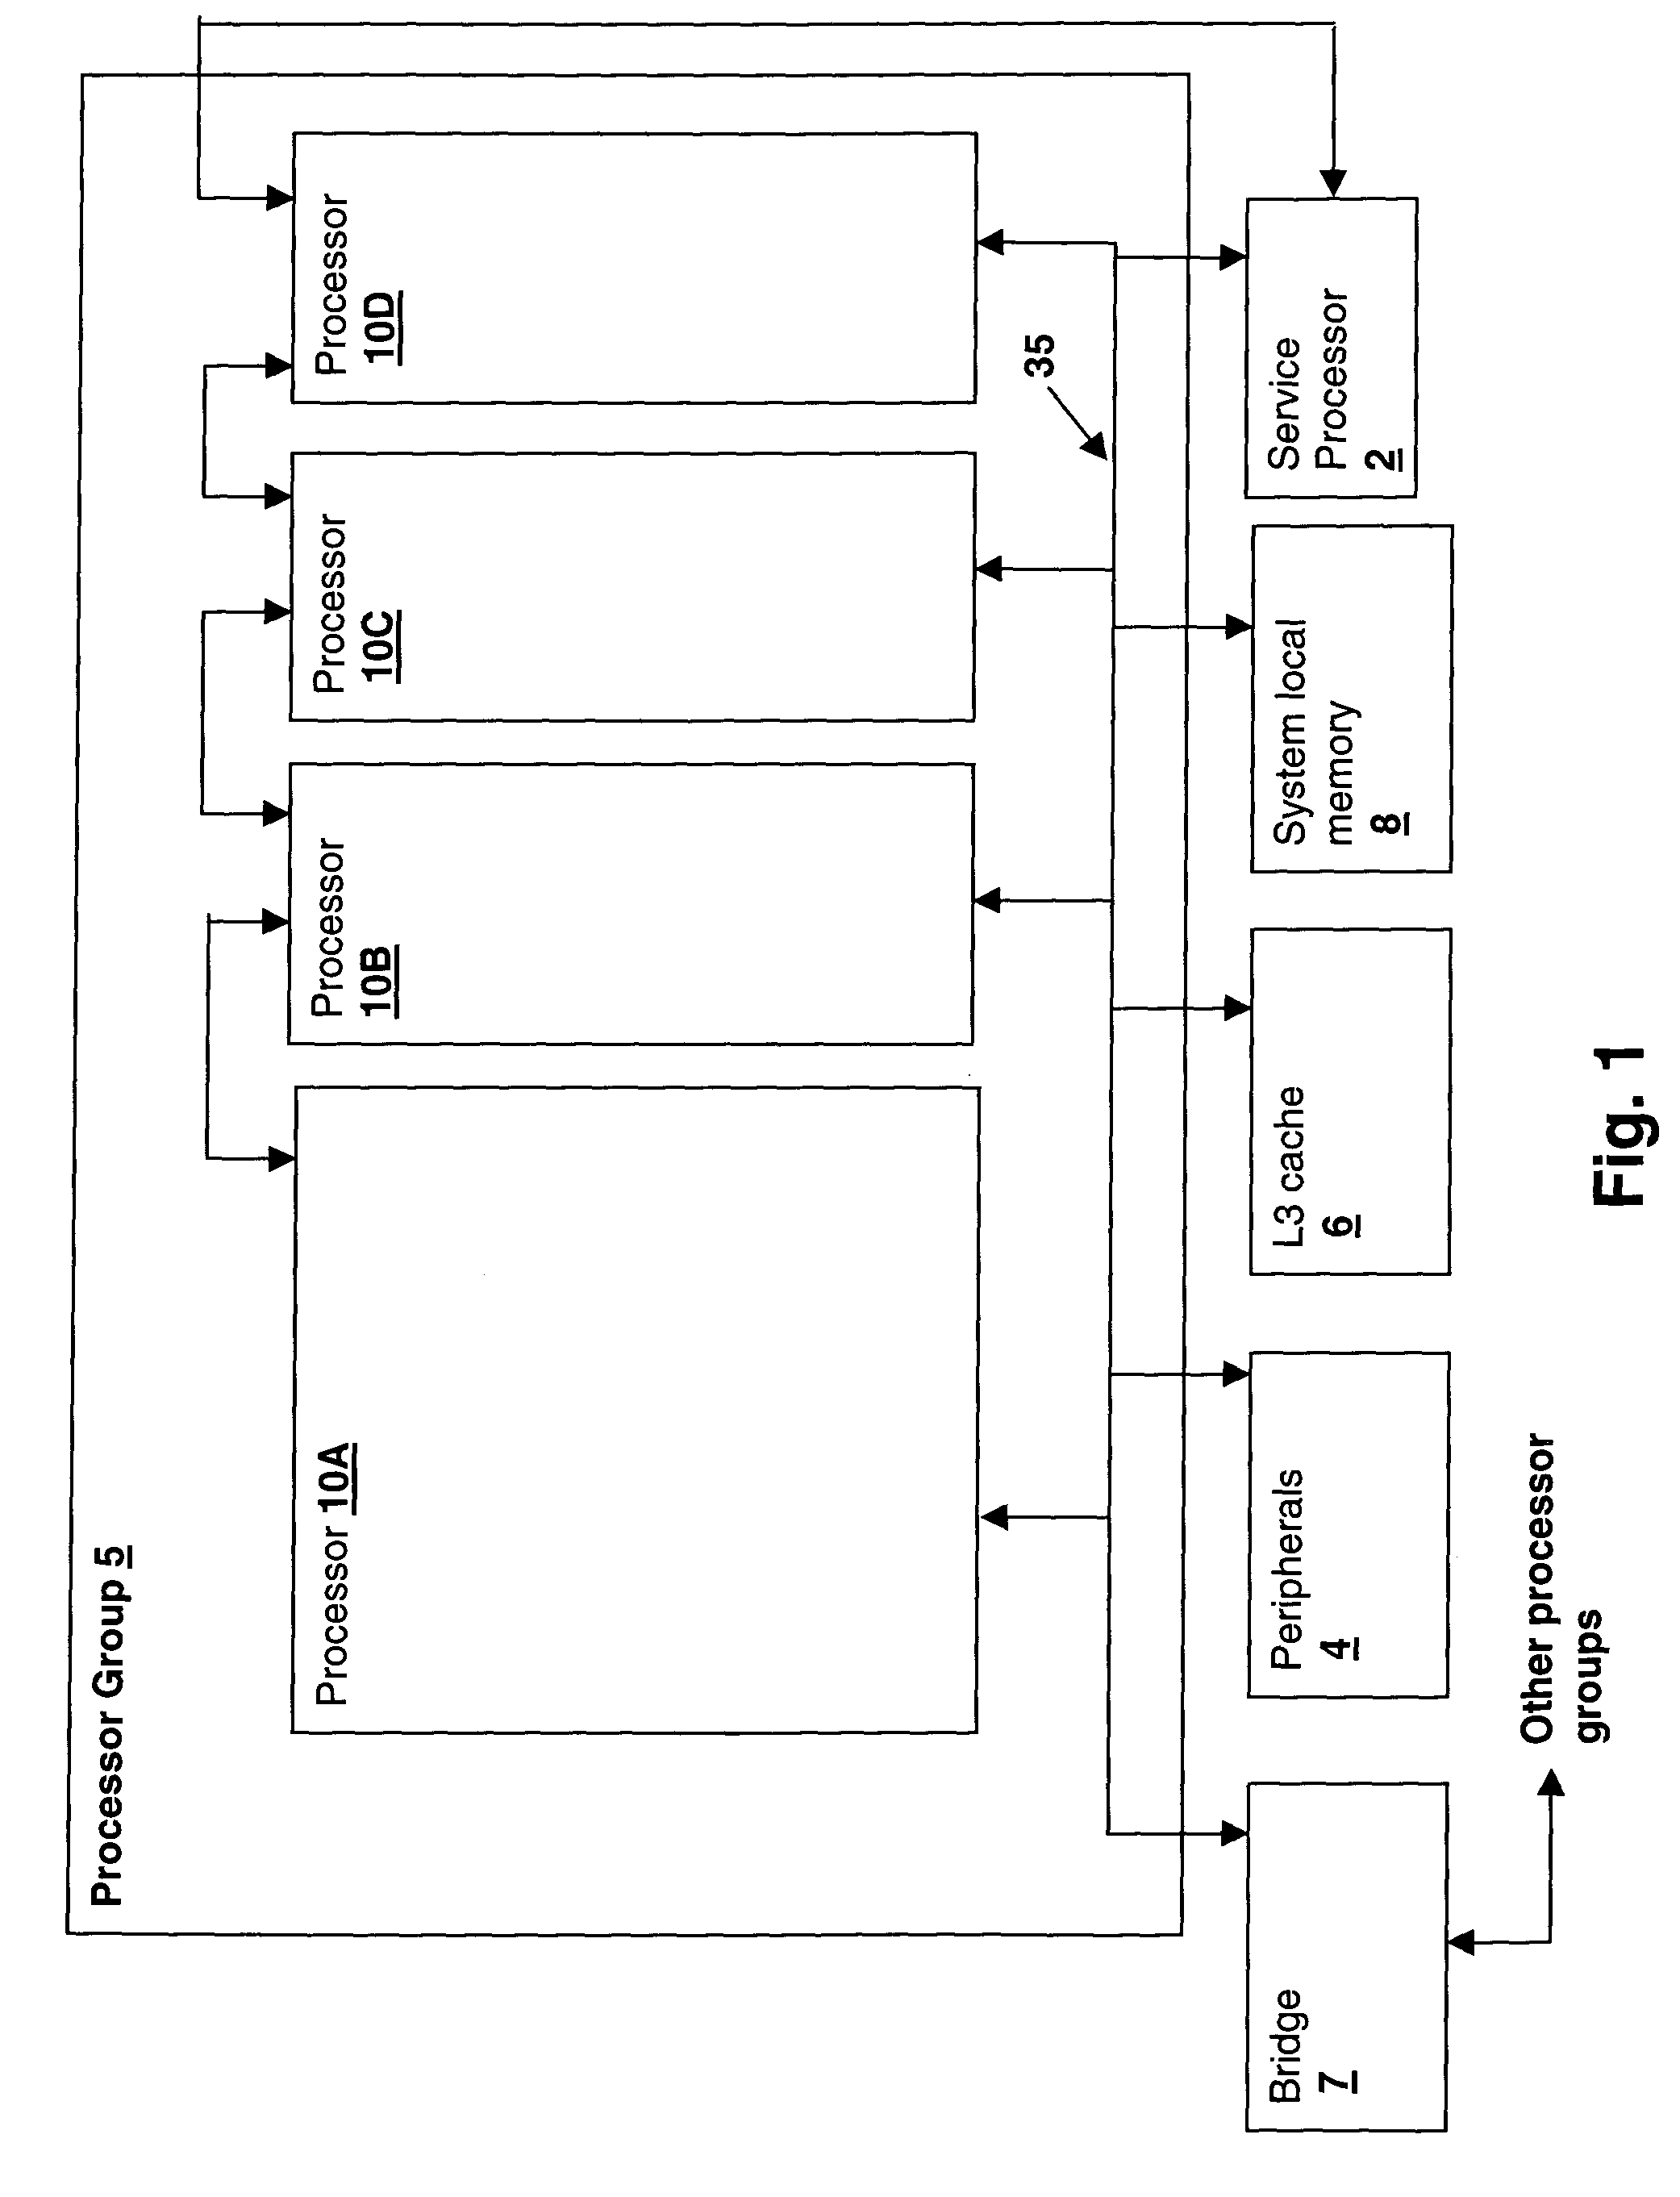 Method and logical apparatus for managing processing system resource use for speculative execution